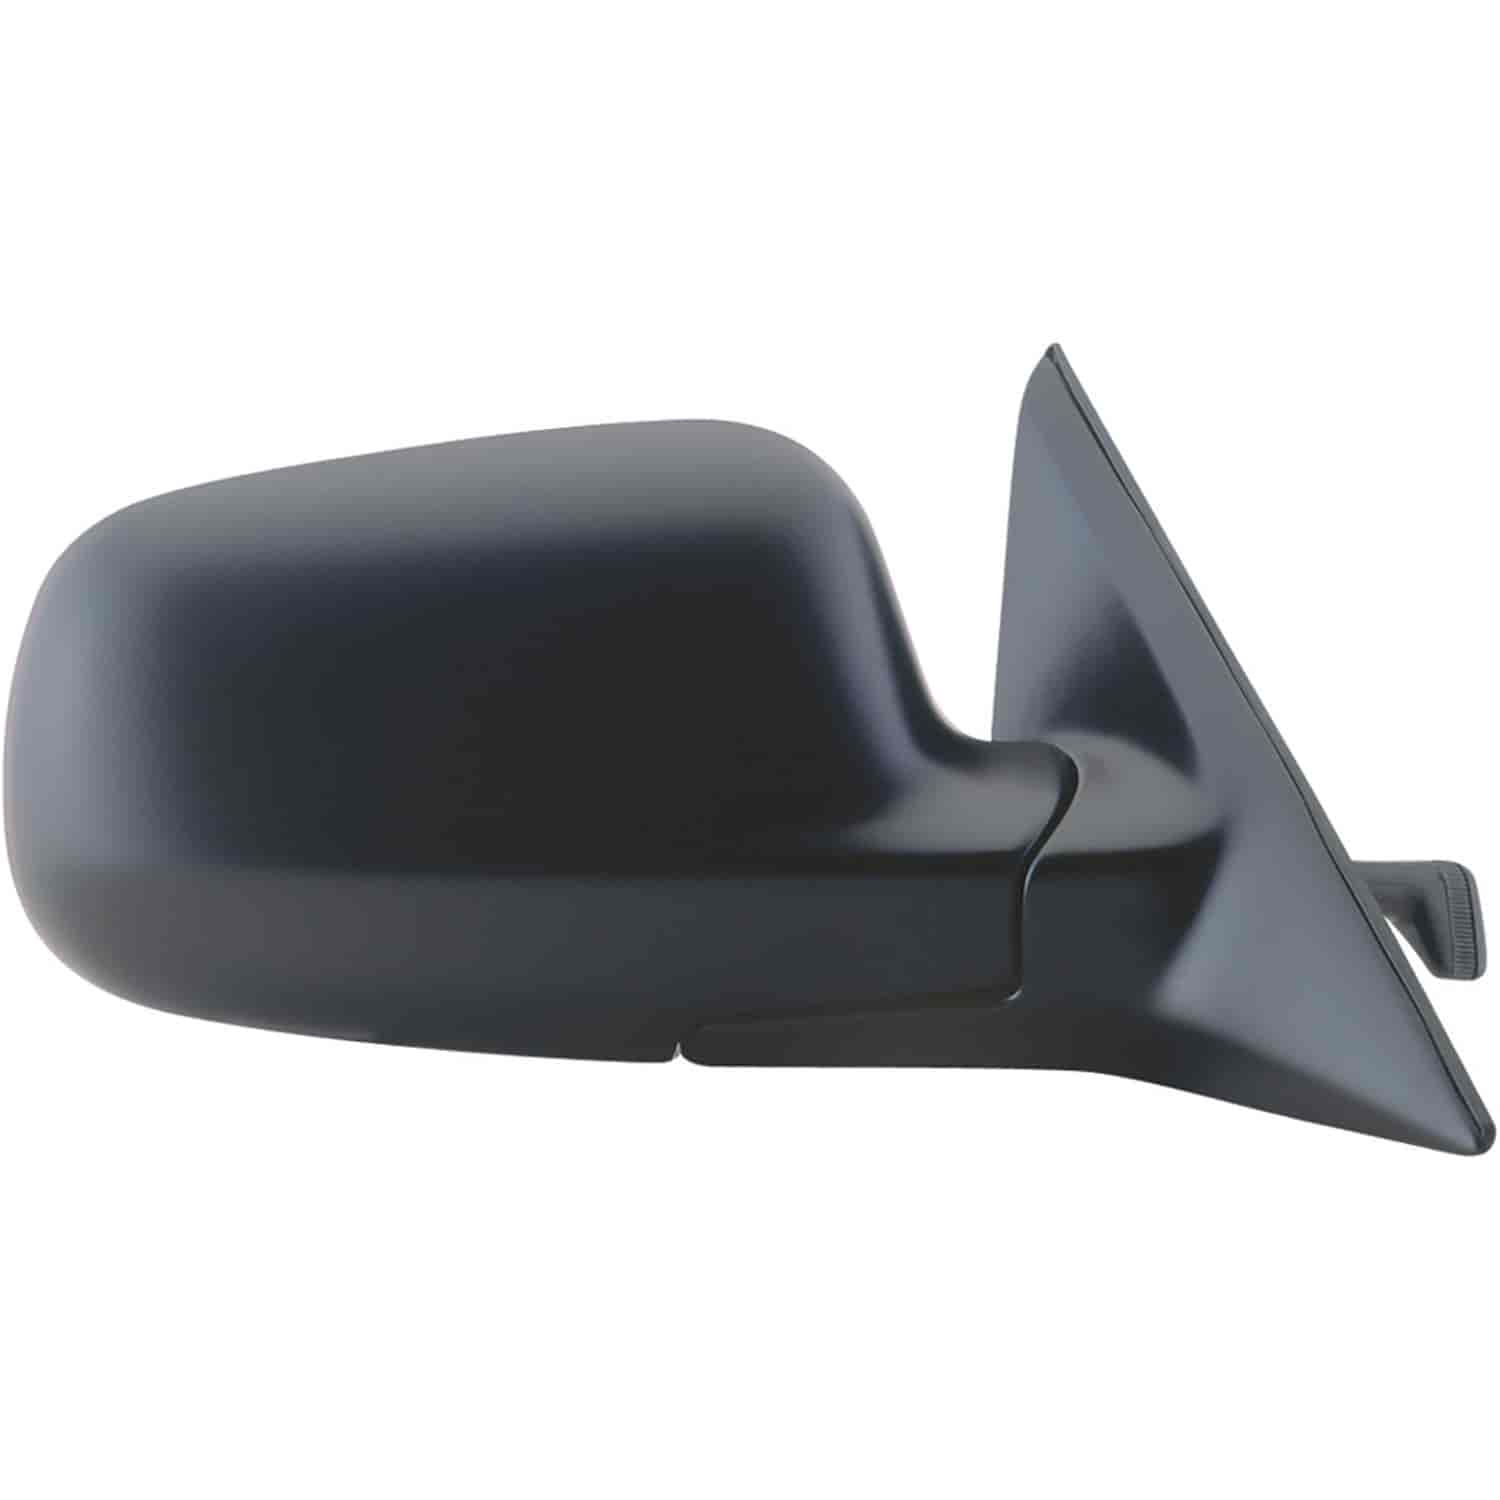 OEM Style Replacement mirror for 94-97 Honda Accord Sedan passenger side mirror tested to fit and fu